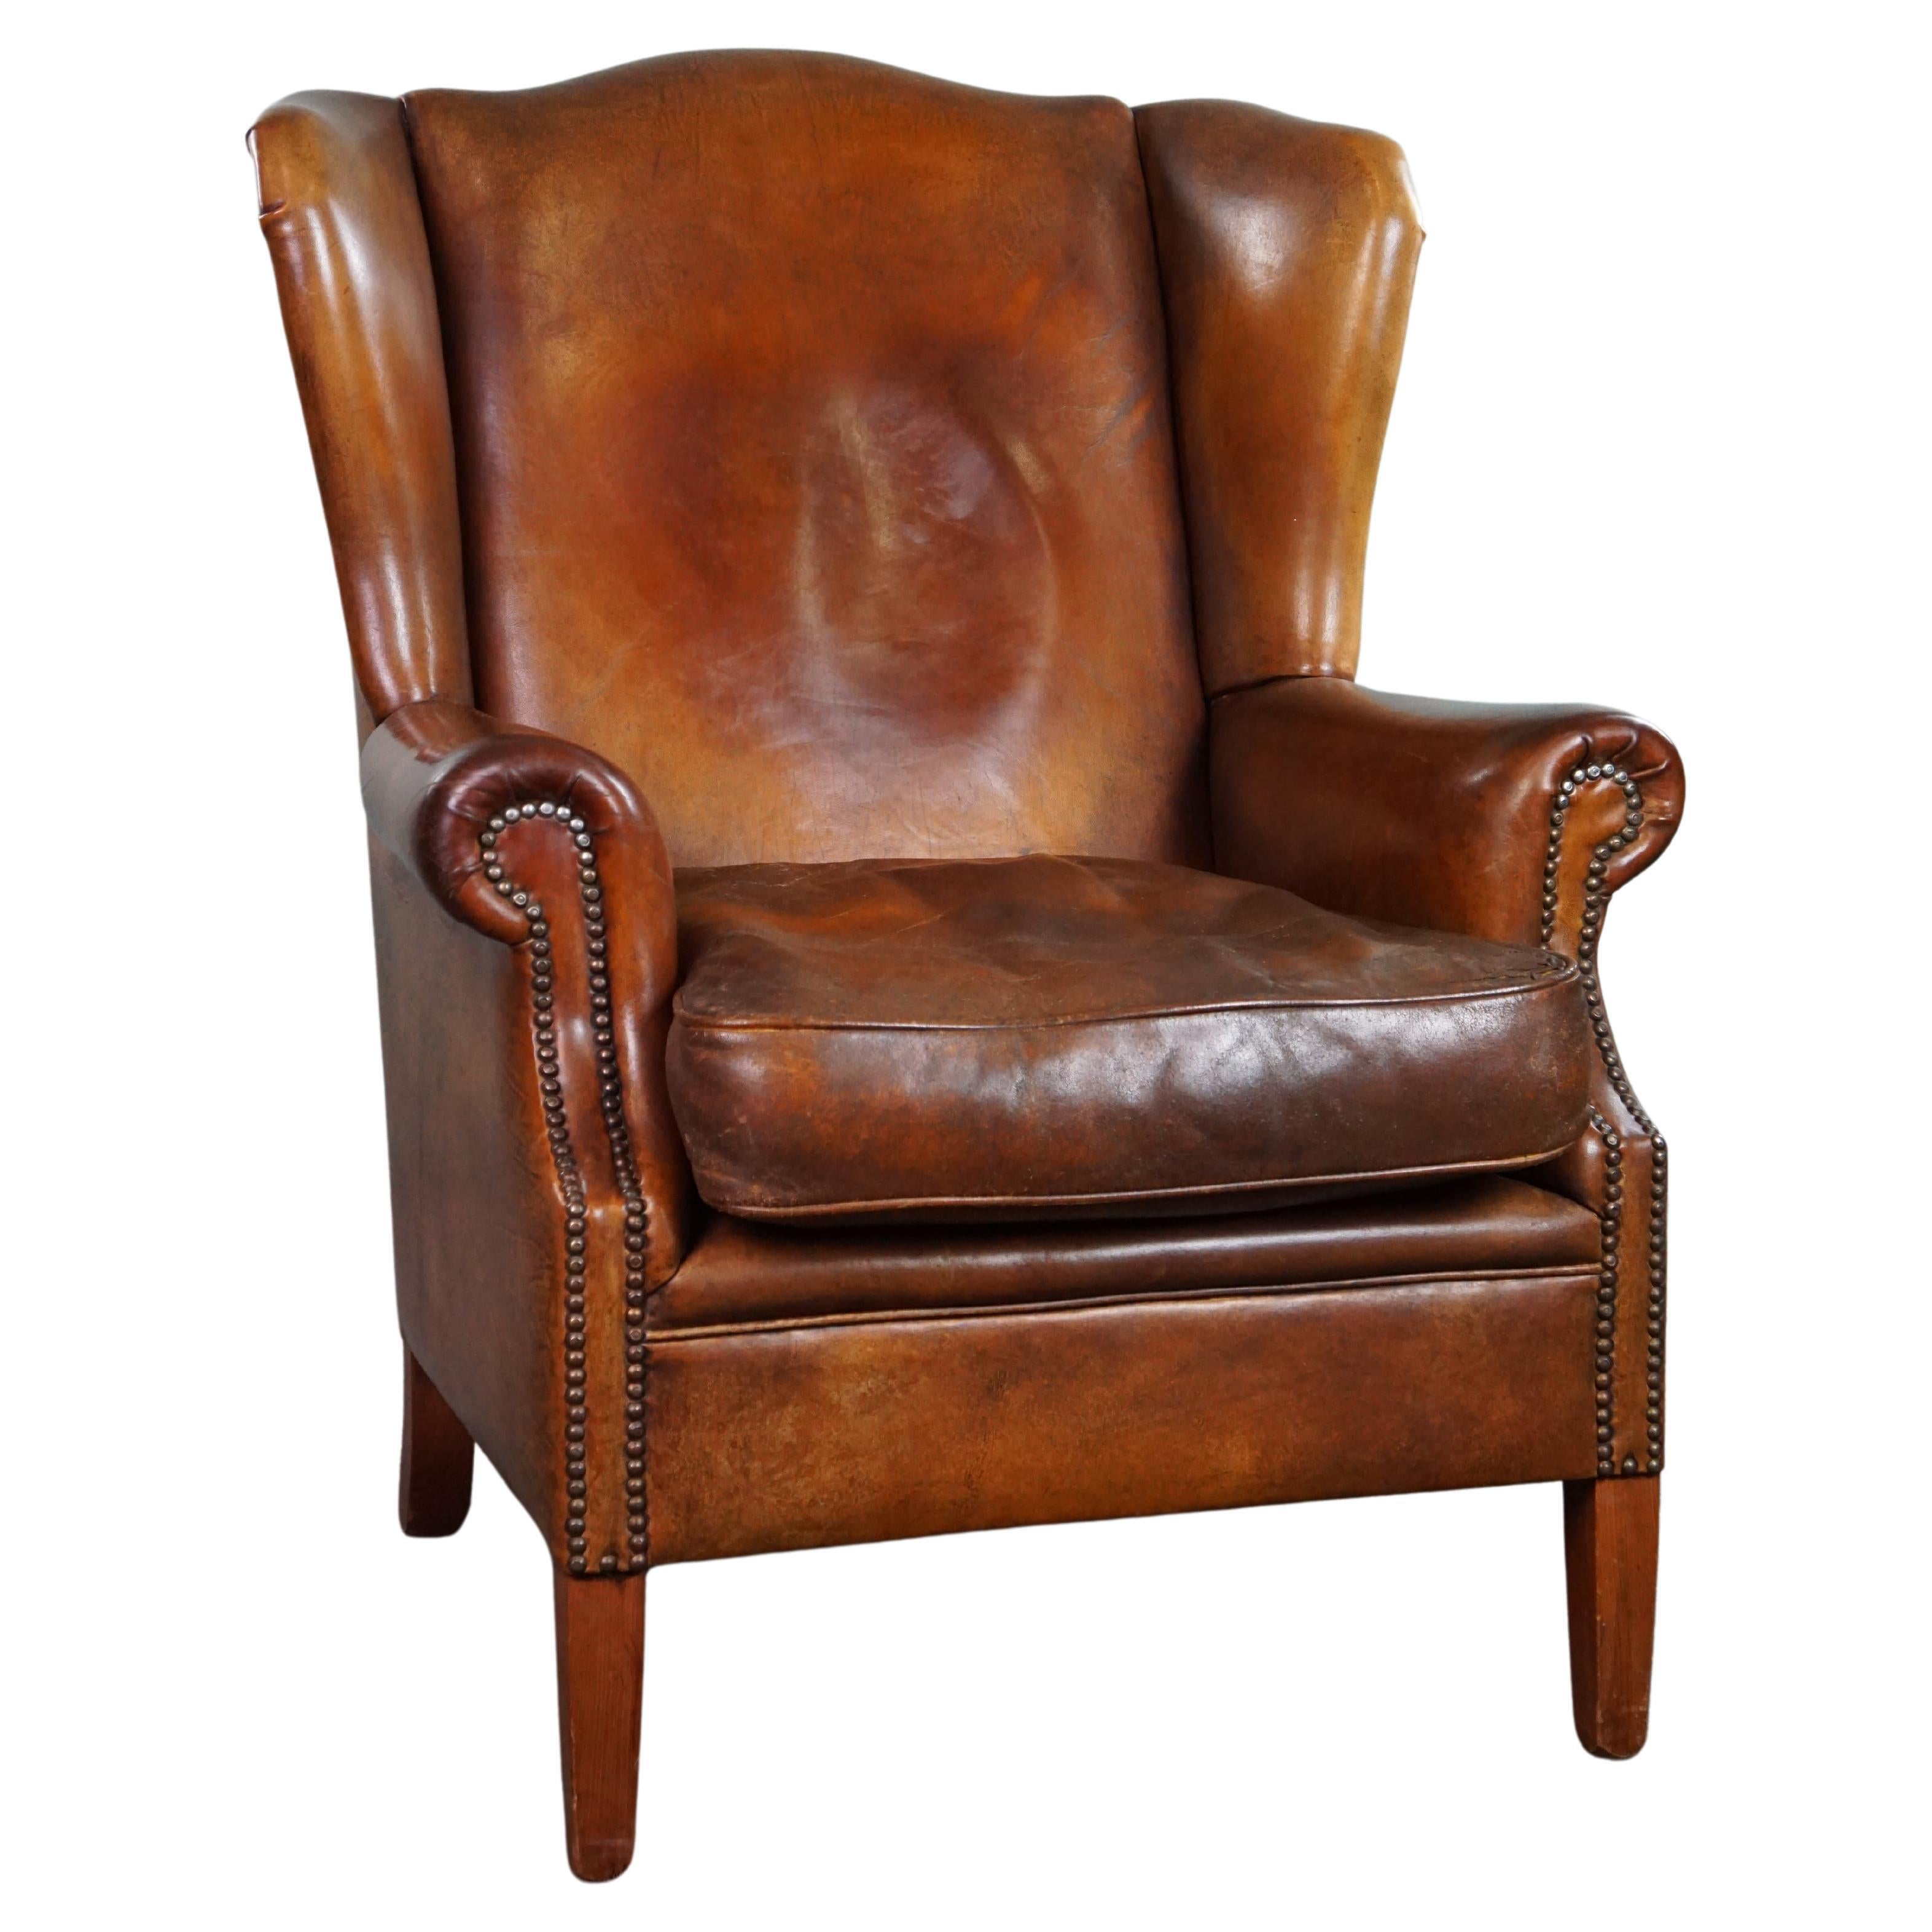 Very rugged wingback armchair made of cognac-colored sheep leather For Sale